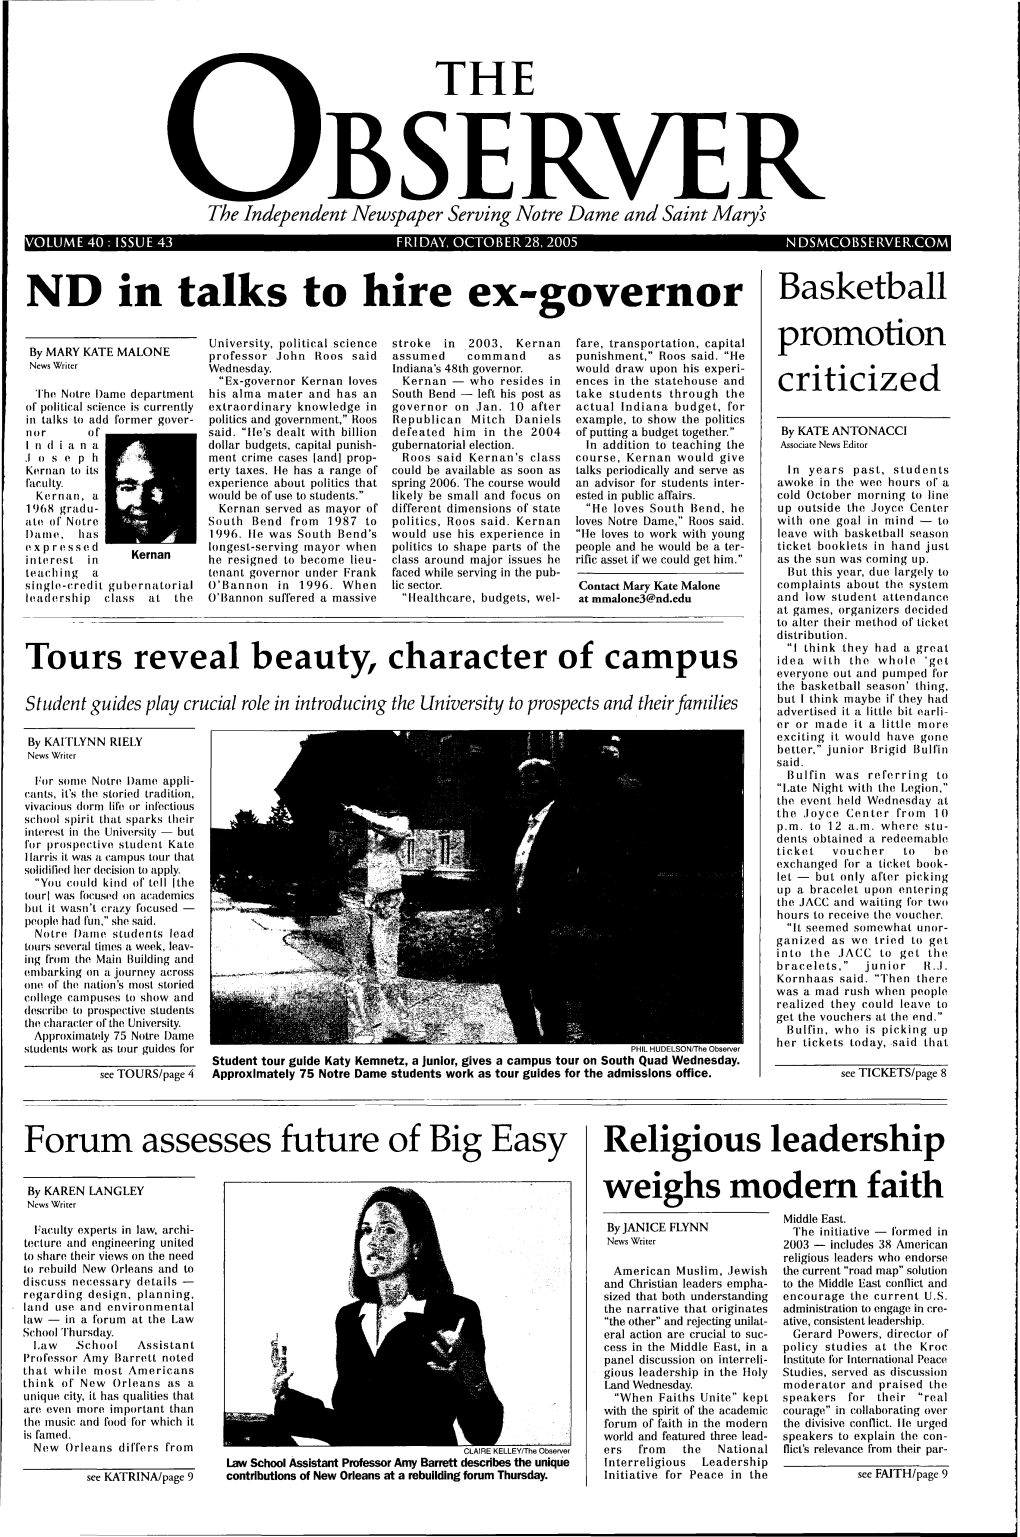 ND in Talks to Hire Ex-Governor Basketball